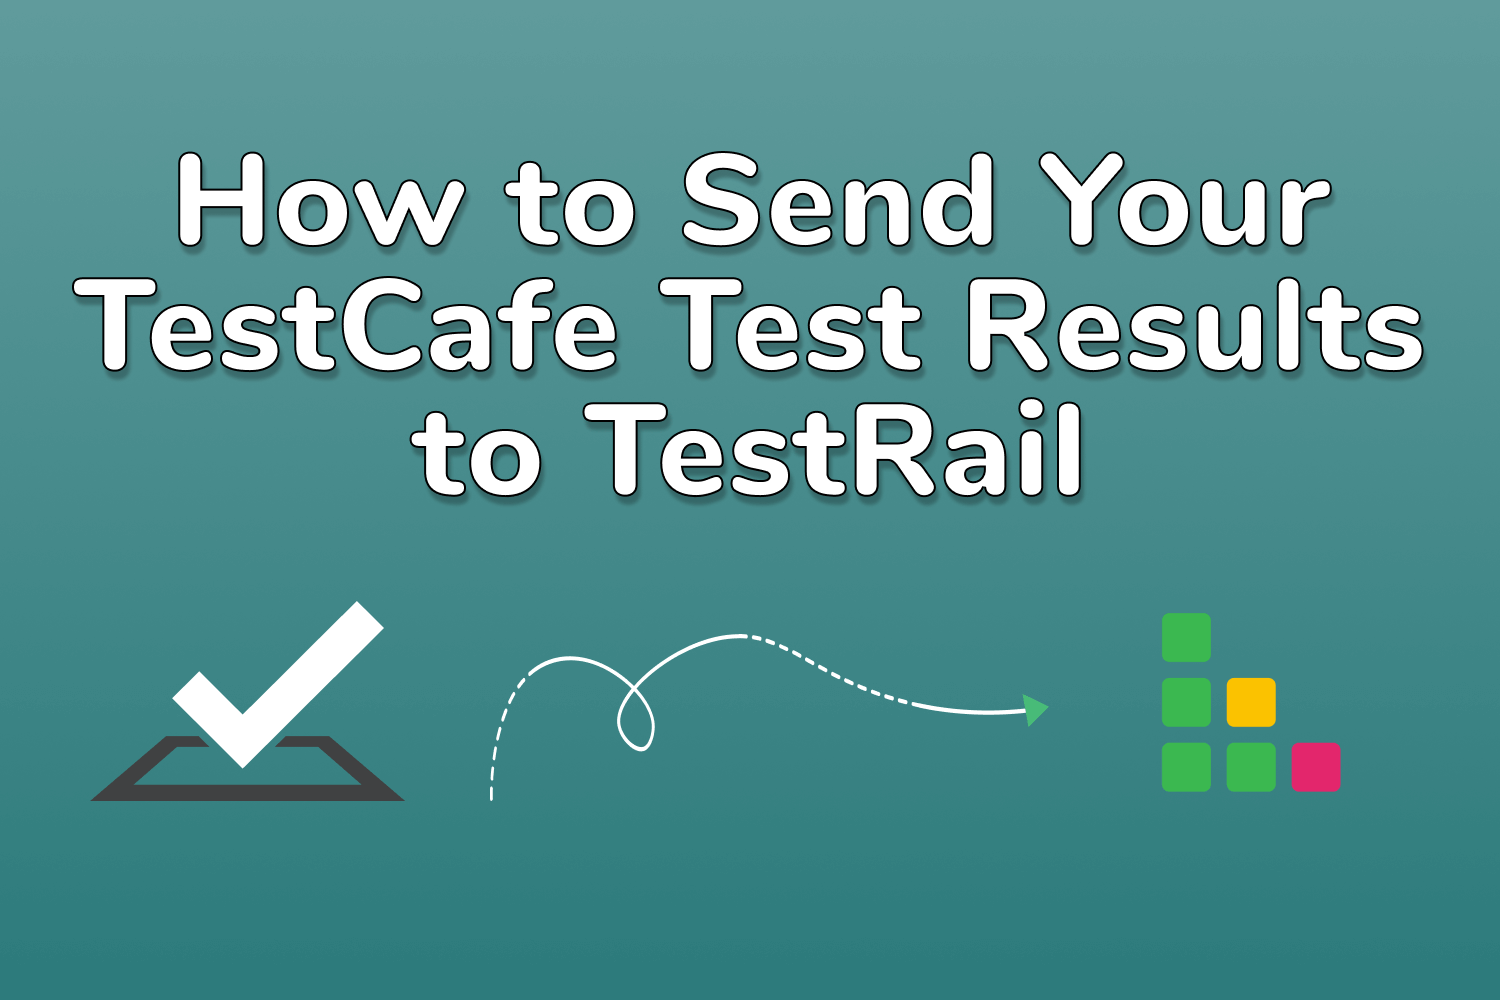 How to Send Your TestCafe Test Results to TestRail